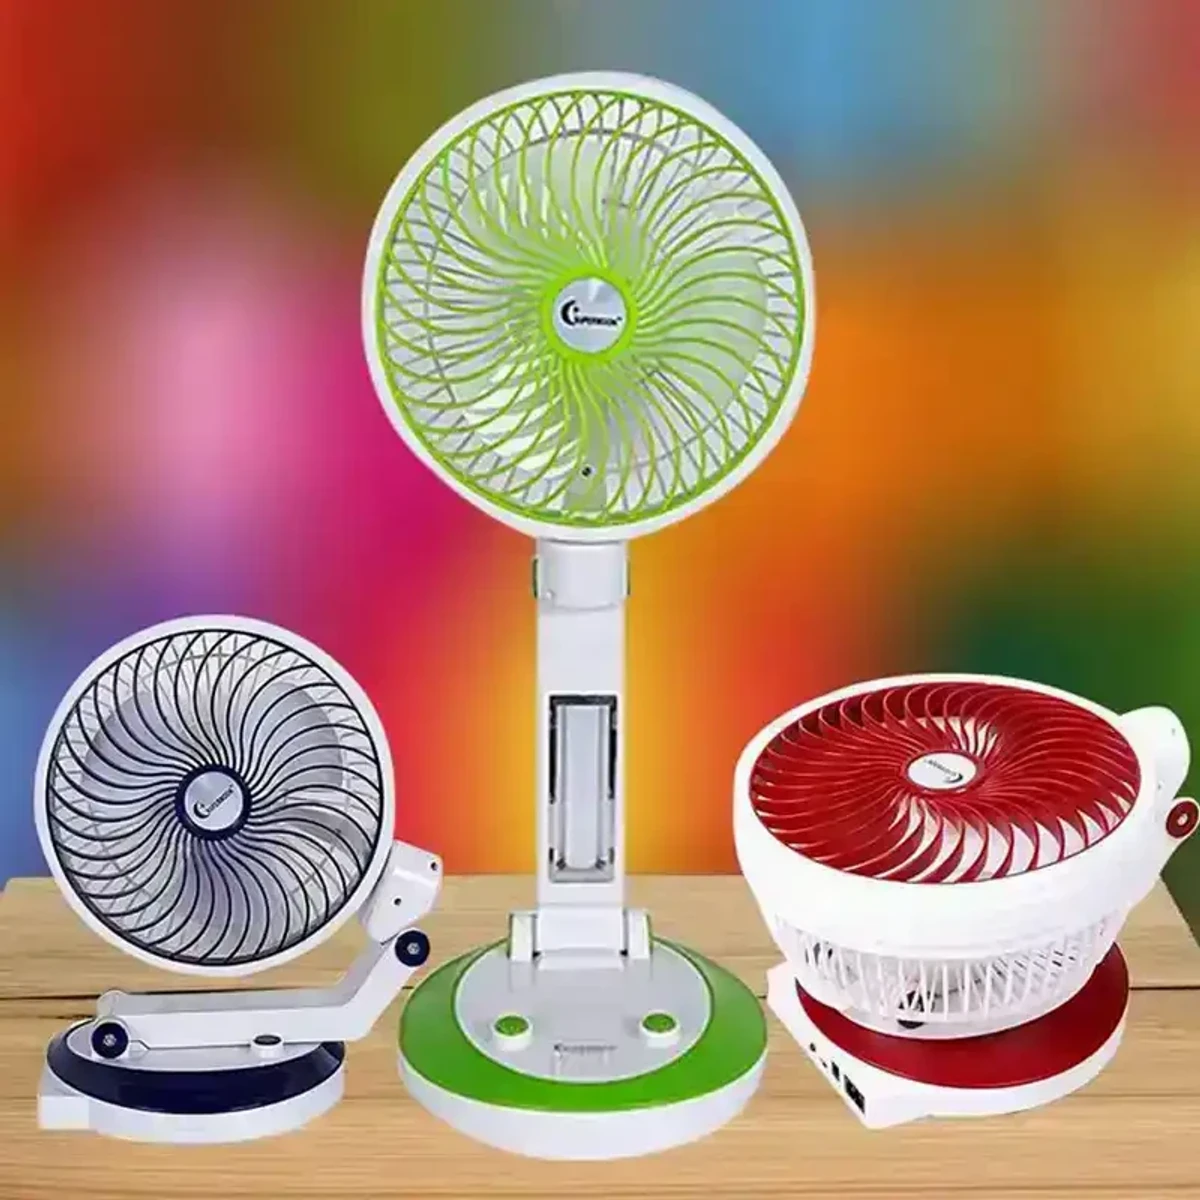 SUPERMOON RECHARGEABLE TABLE FAN PLUS LIGHT 16% Off